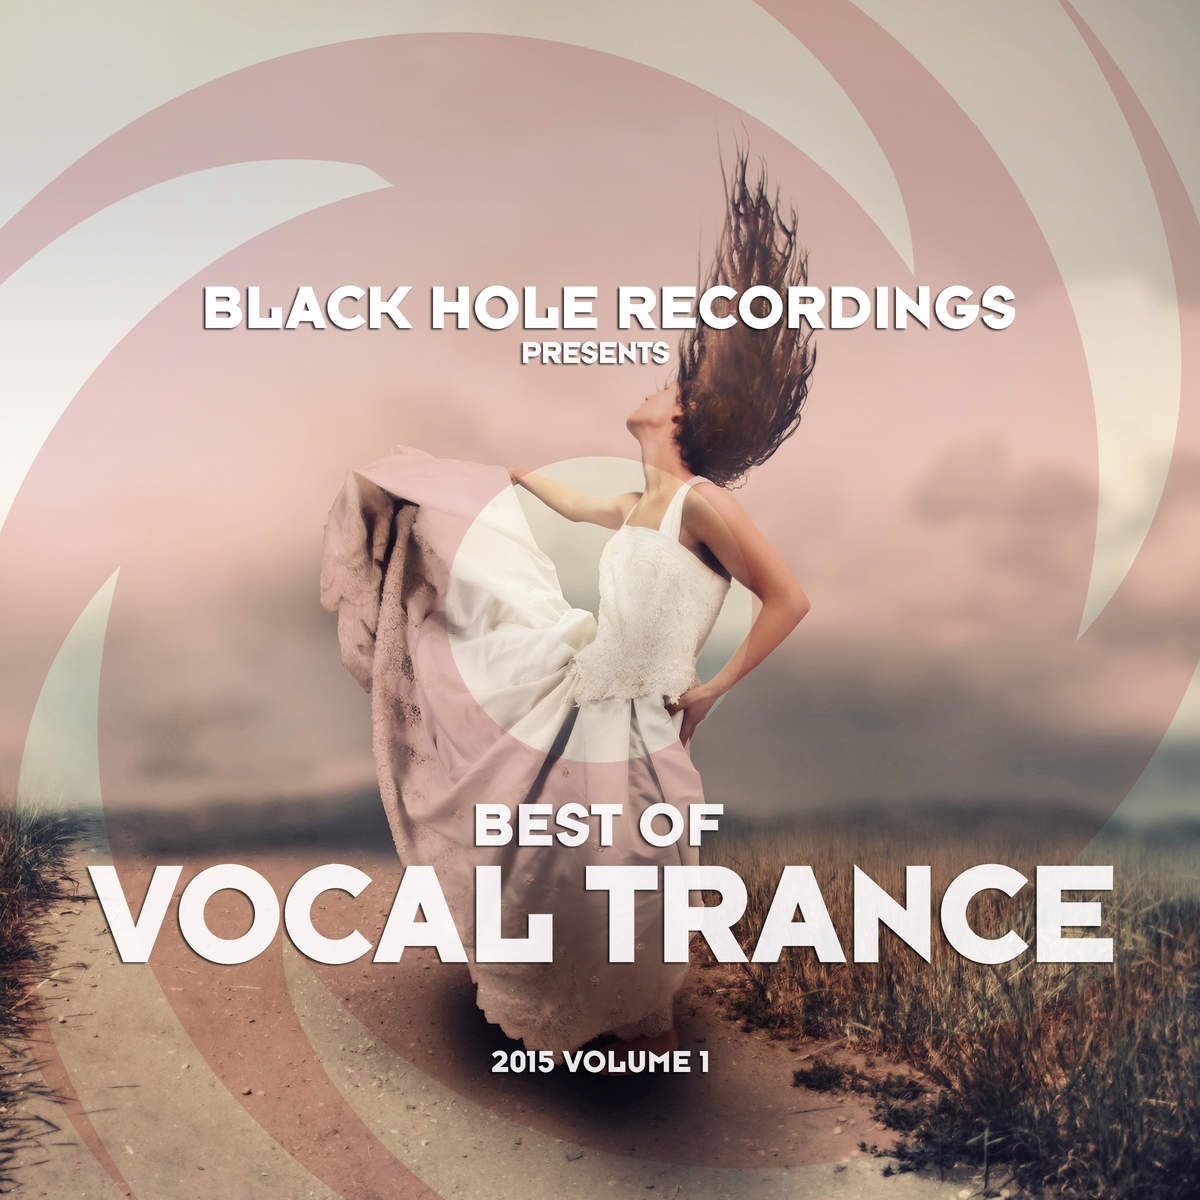 Black Hole Recordings Presents Best of Vocal Trance 2015 Volume 1